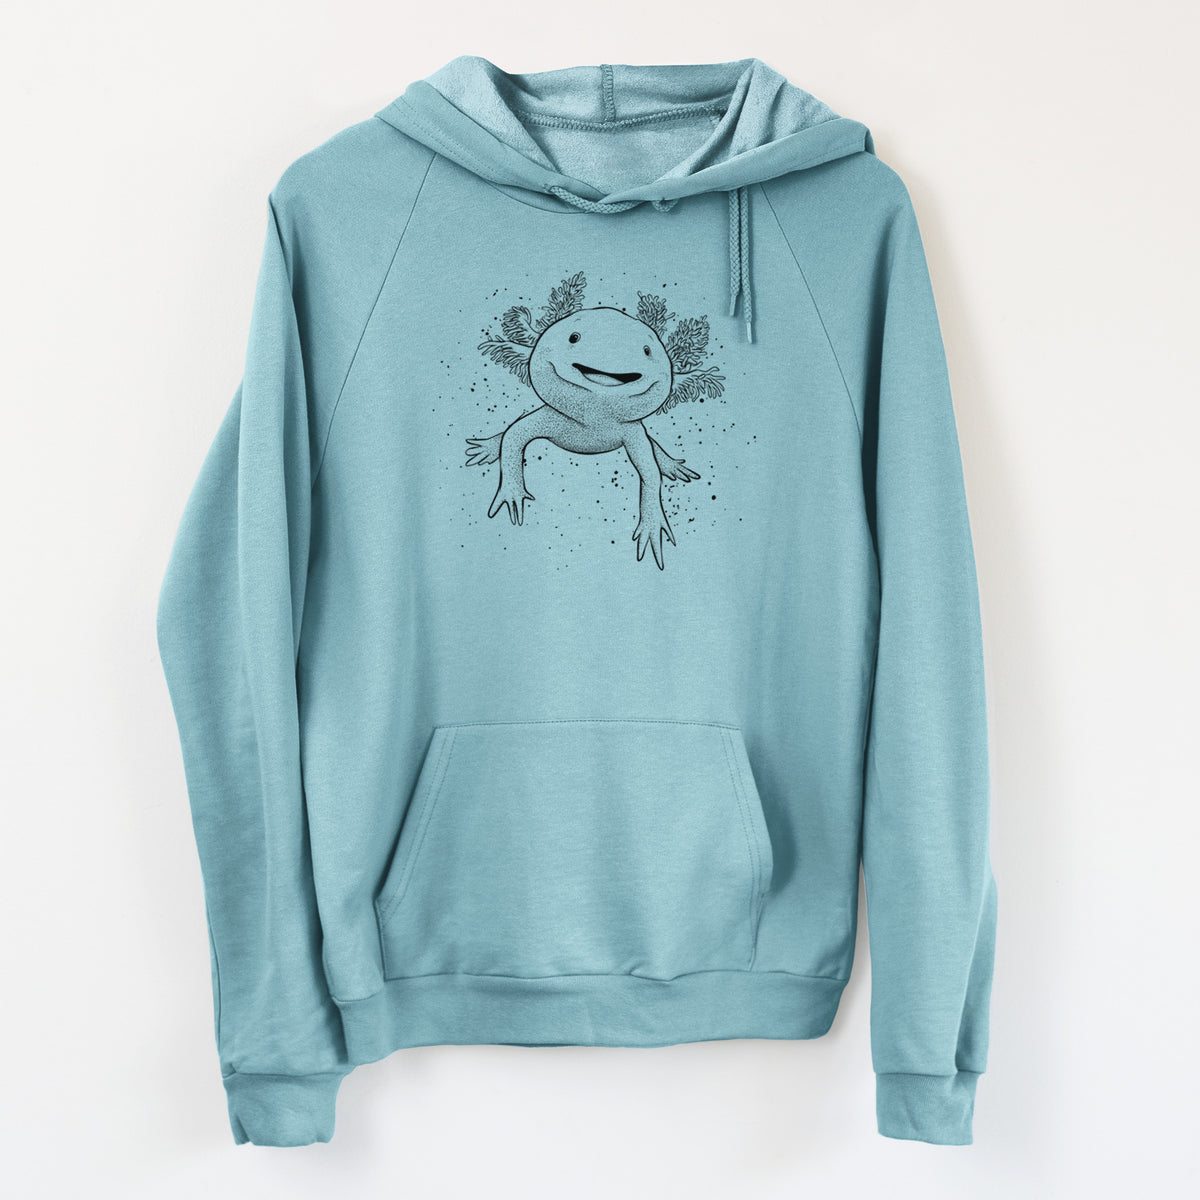 Axolotl - Ambystoma mexicanum - Unisex Pullover Hoodie - Made in USA - 100% Organic Cotton